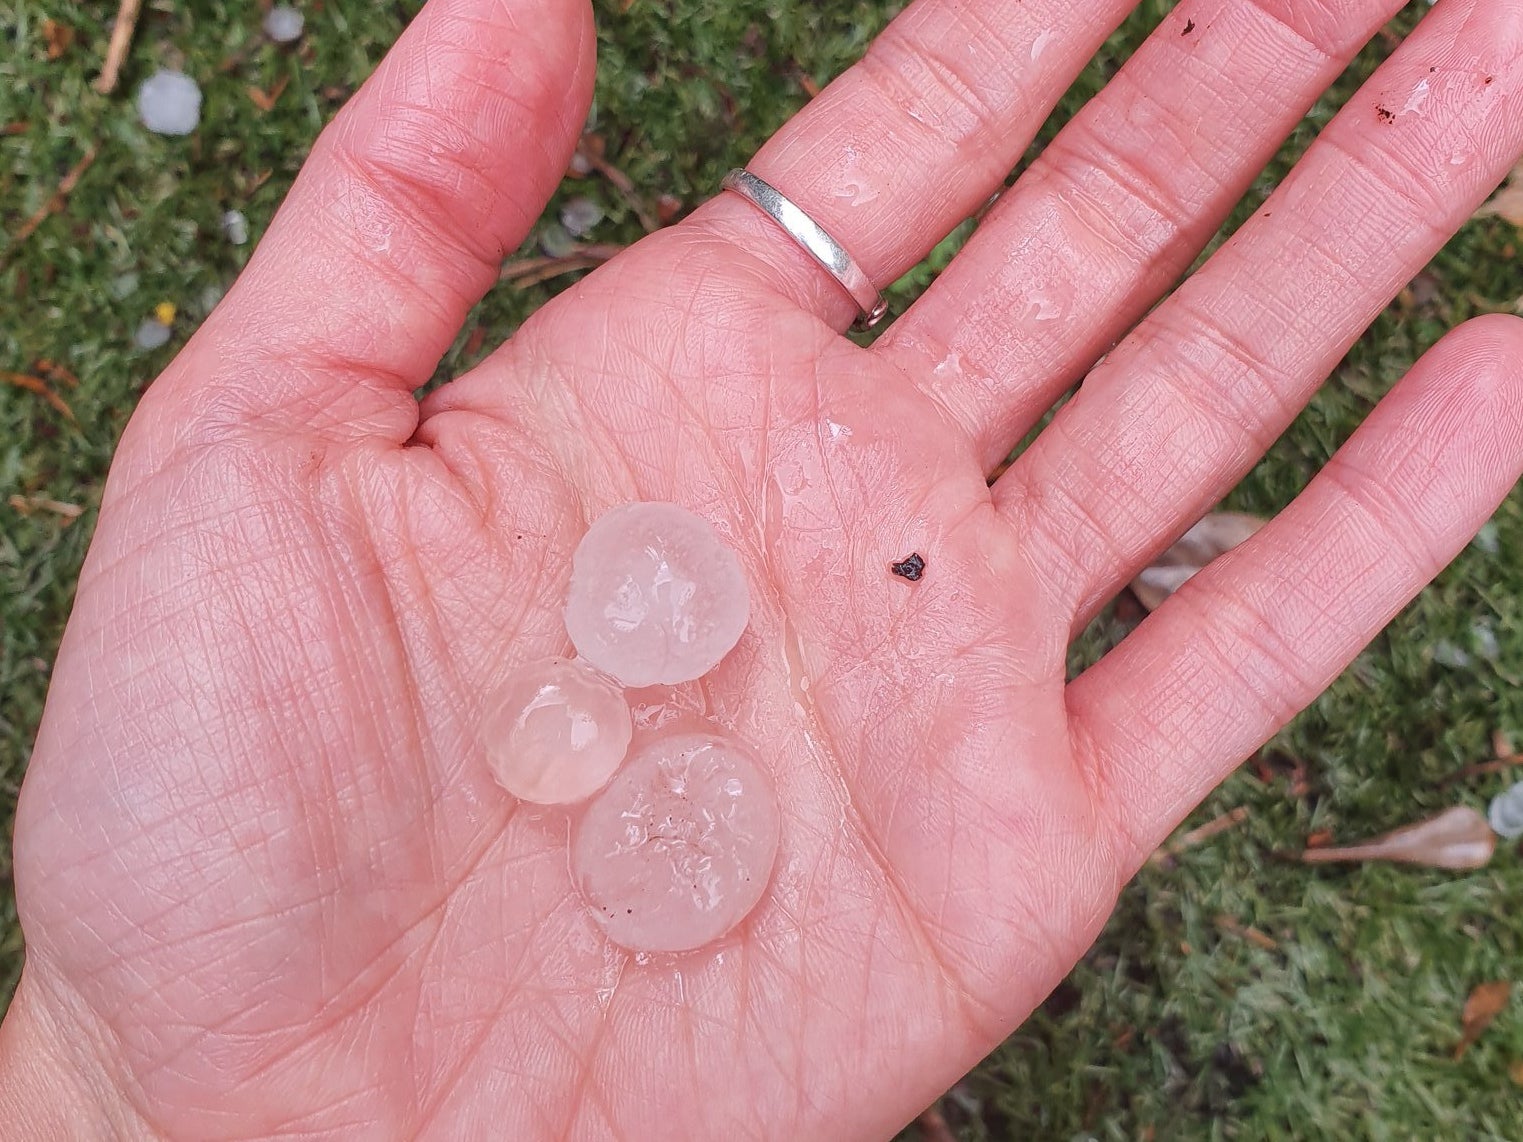 Large hailstones fell in Leeds on Friday